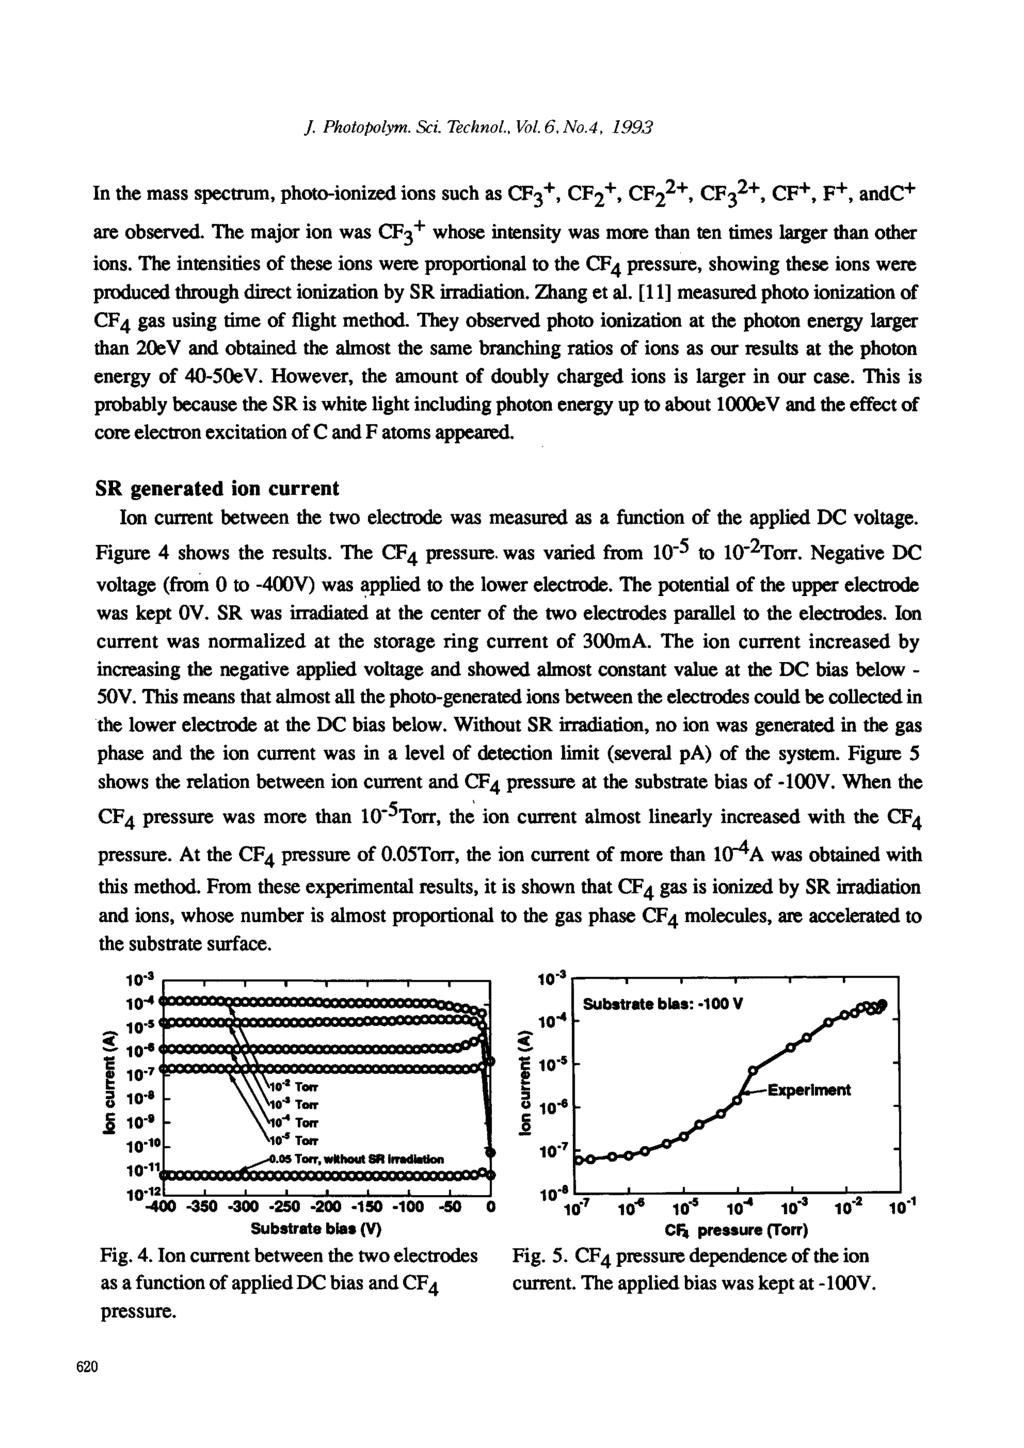 J. Photopolym. Sci. Technol., Vol. 6, No.4, 1993 In the mass spectrum, photo-ionized ions such as CF3+, CF2+, CF22+, CF32+, CF+, F+, andc+ are observed.